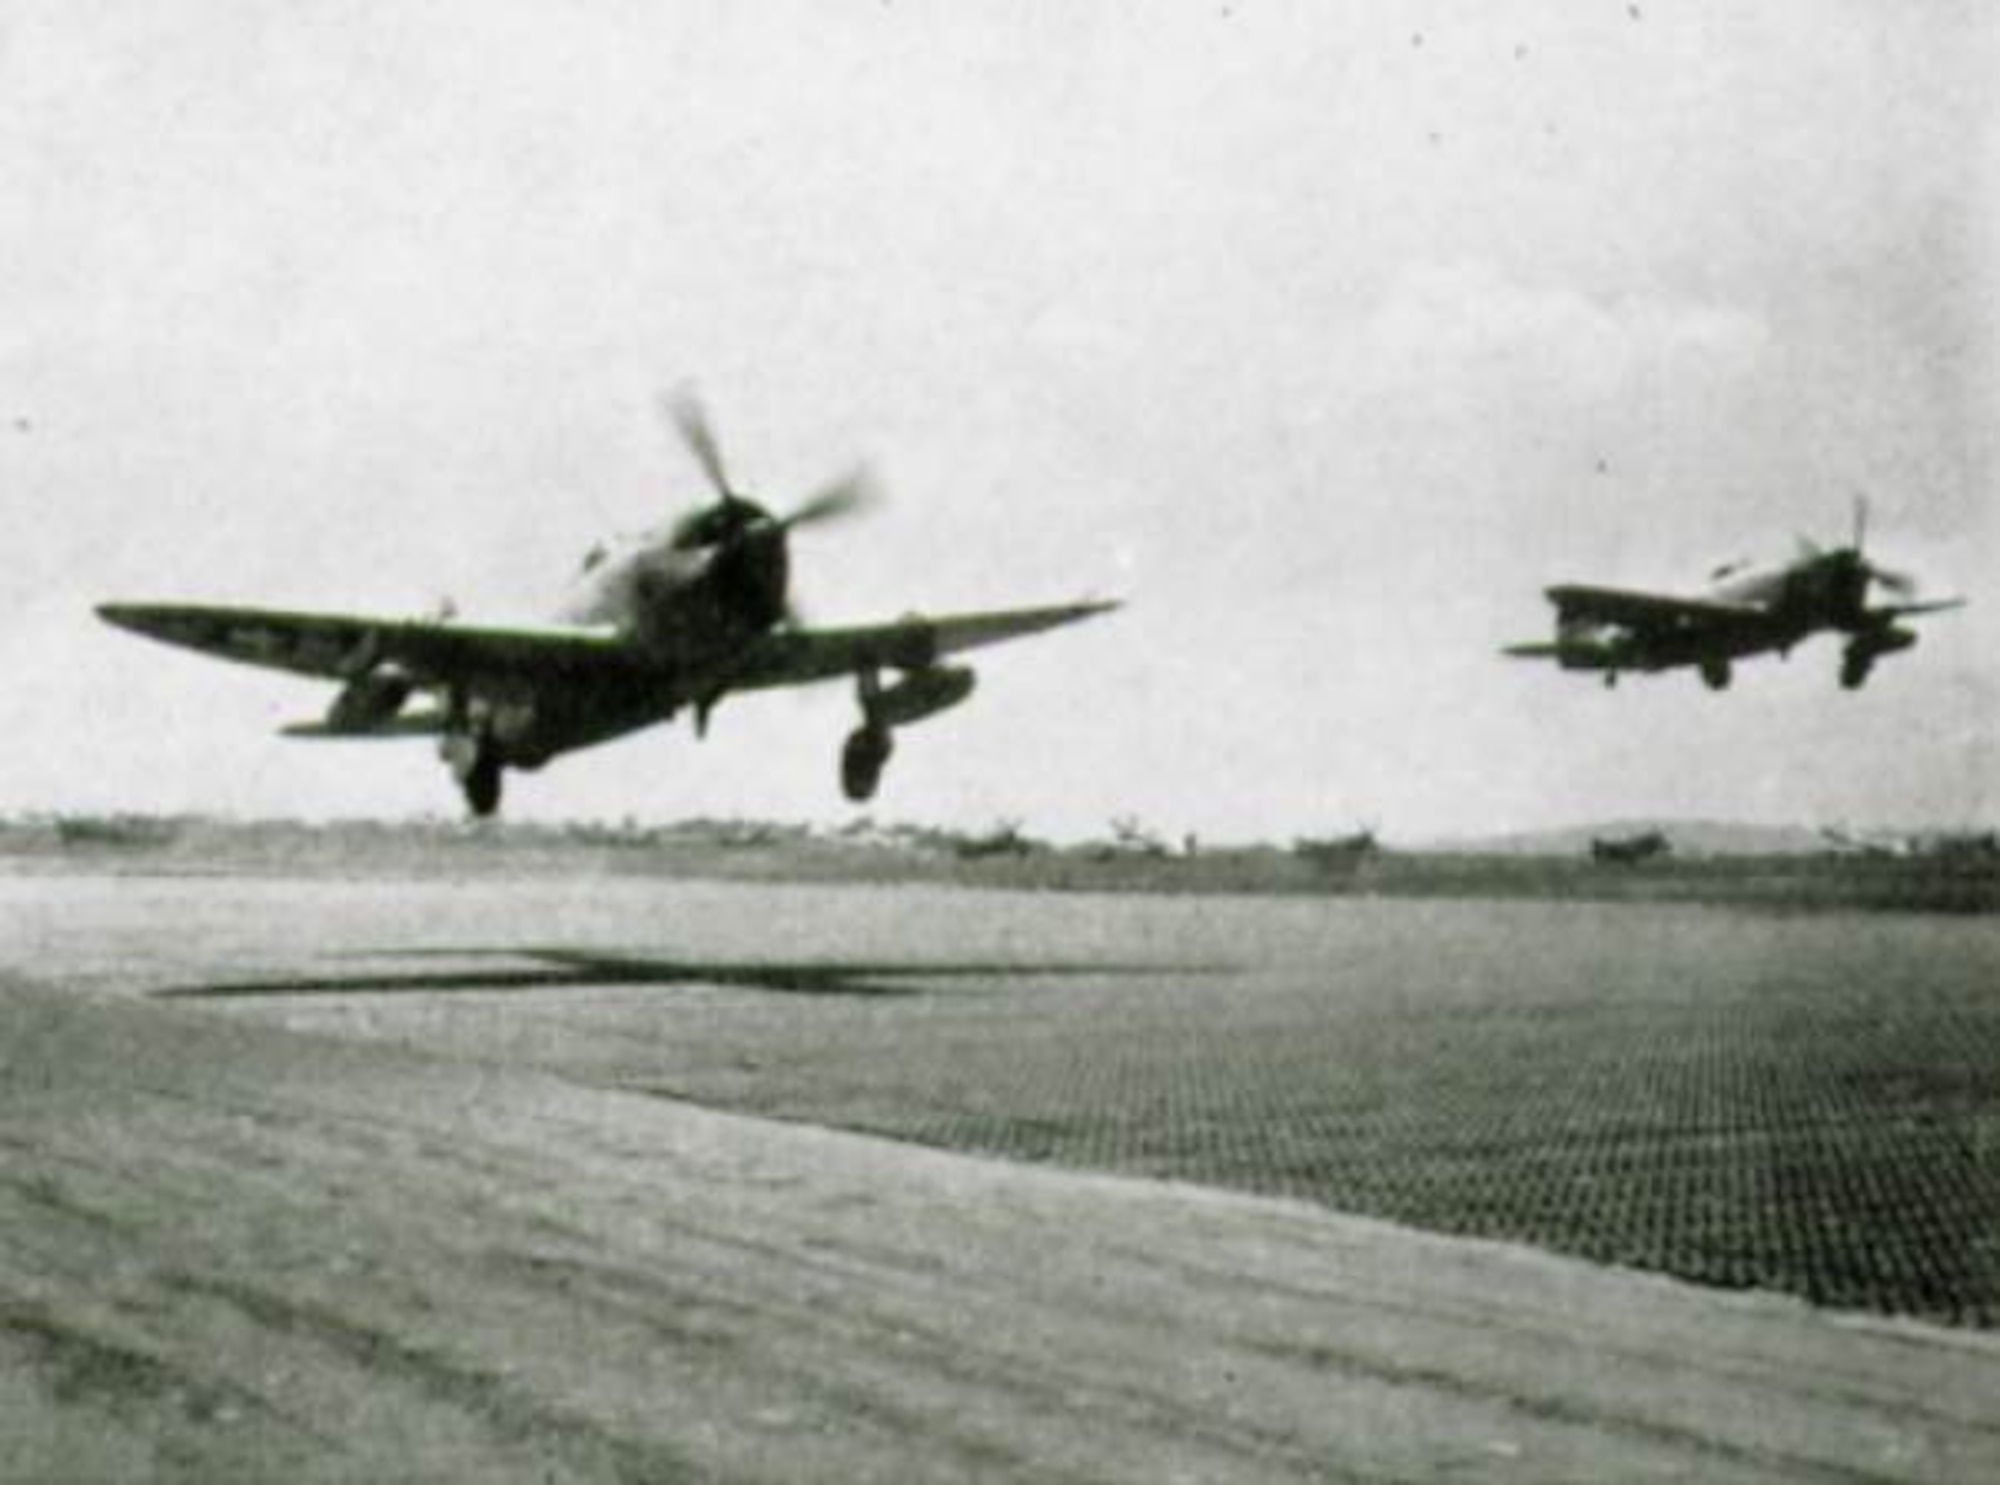 A pair of 371st Fighter Group P-47 Thunderbolt fighters on takeoff from an airfield in Europe.  The Republic P-47 Thunderbolt fighter was the primary aircraft assigned to the 371st Fighter Group during World War II.  The group operated both the Razorback and Bubbletop versions of the Thunderbolt, including those produced at Republics primary factory at Farmingdale, New York as well as its wartime factory at Evansville, Indiana.  (The Story of the 371st Fighter Group in the E.T.O.)